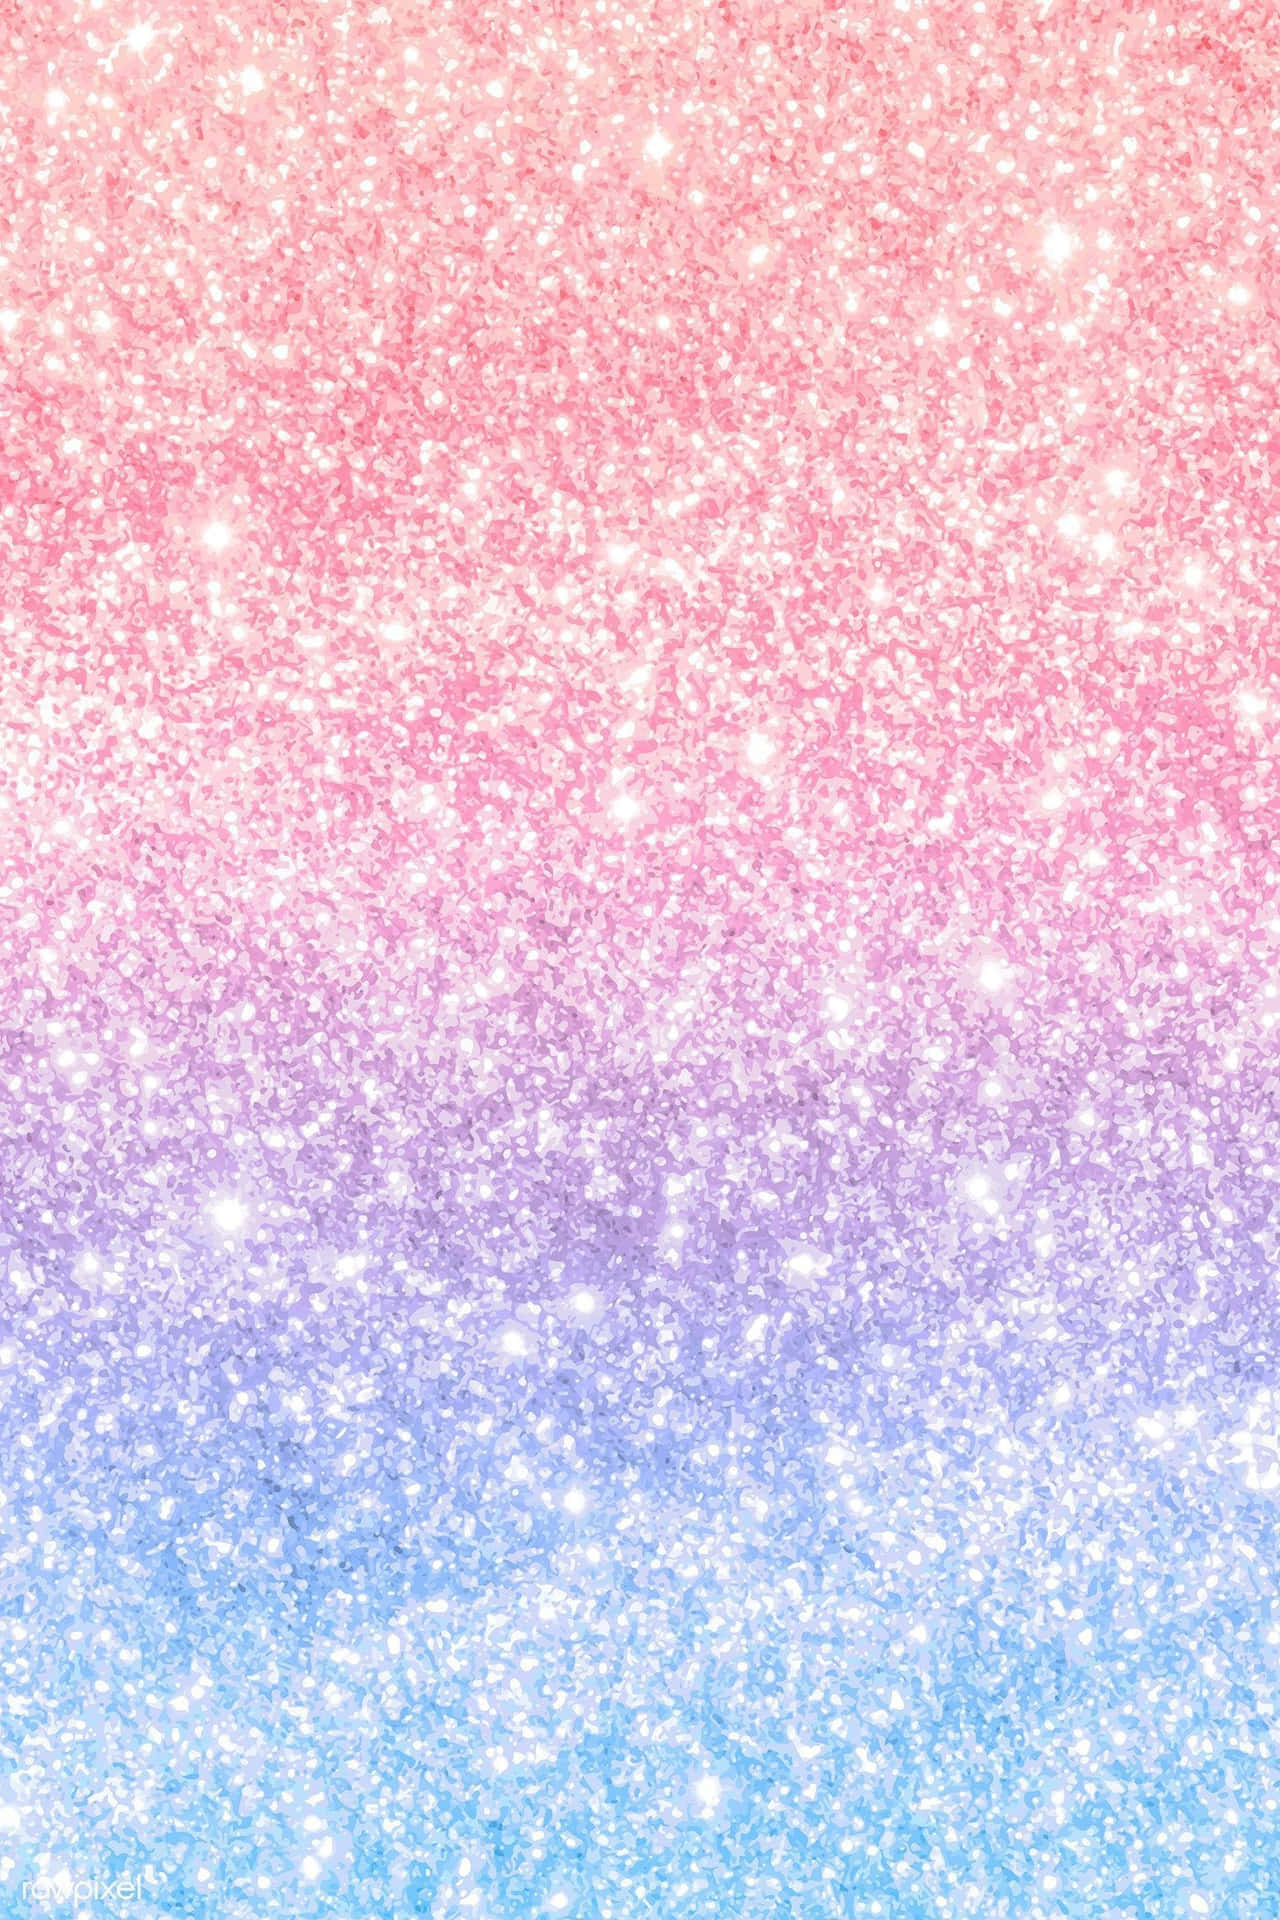 Add a touch of glamour to your background with beautiful sparkles!